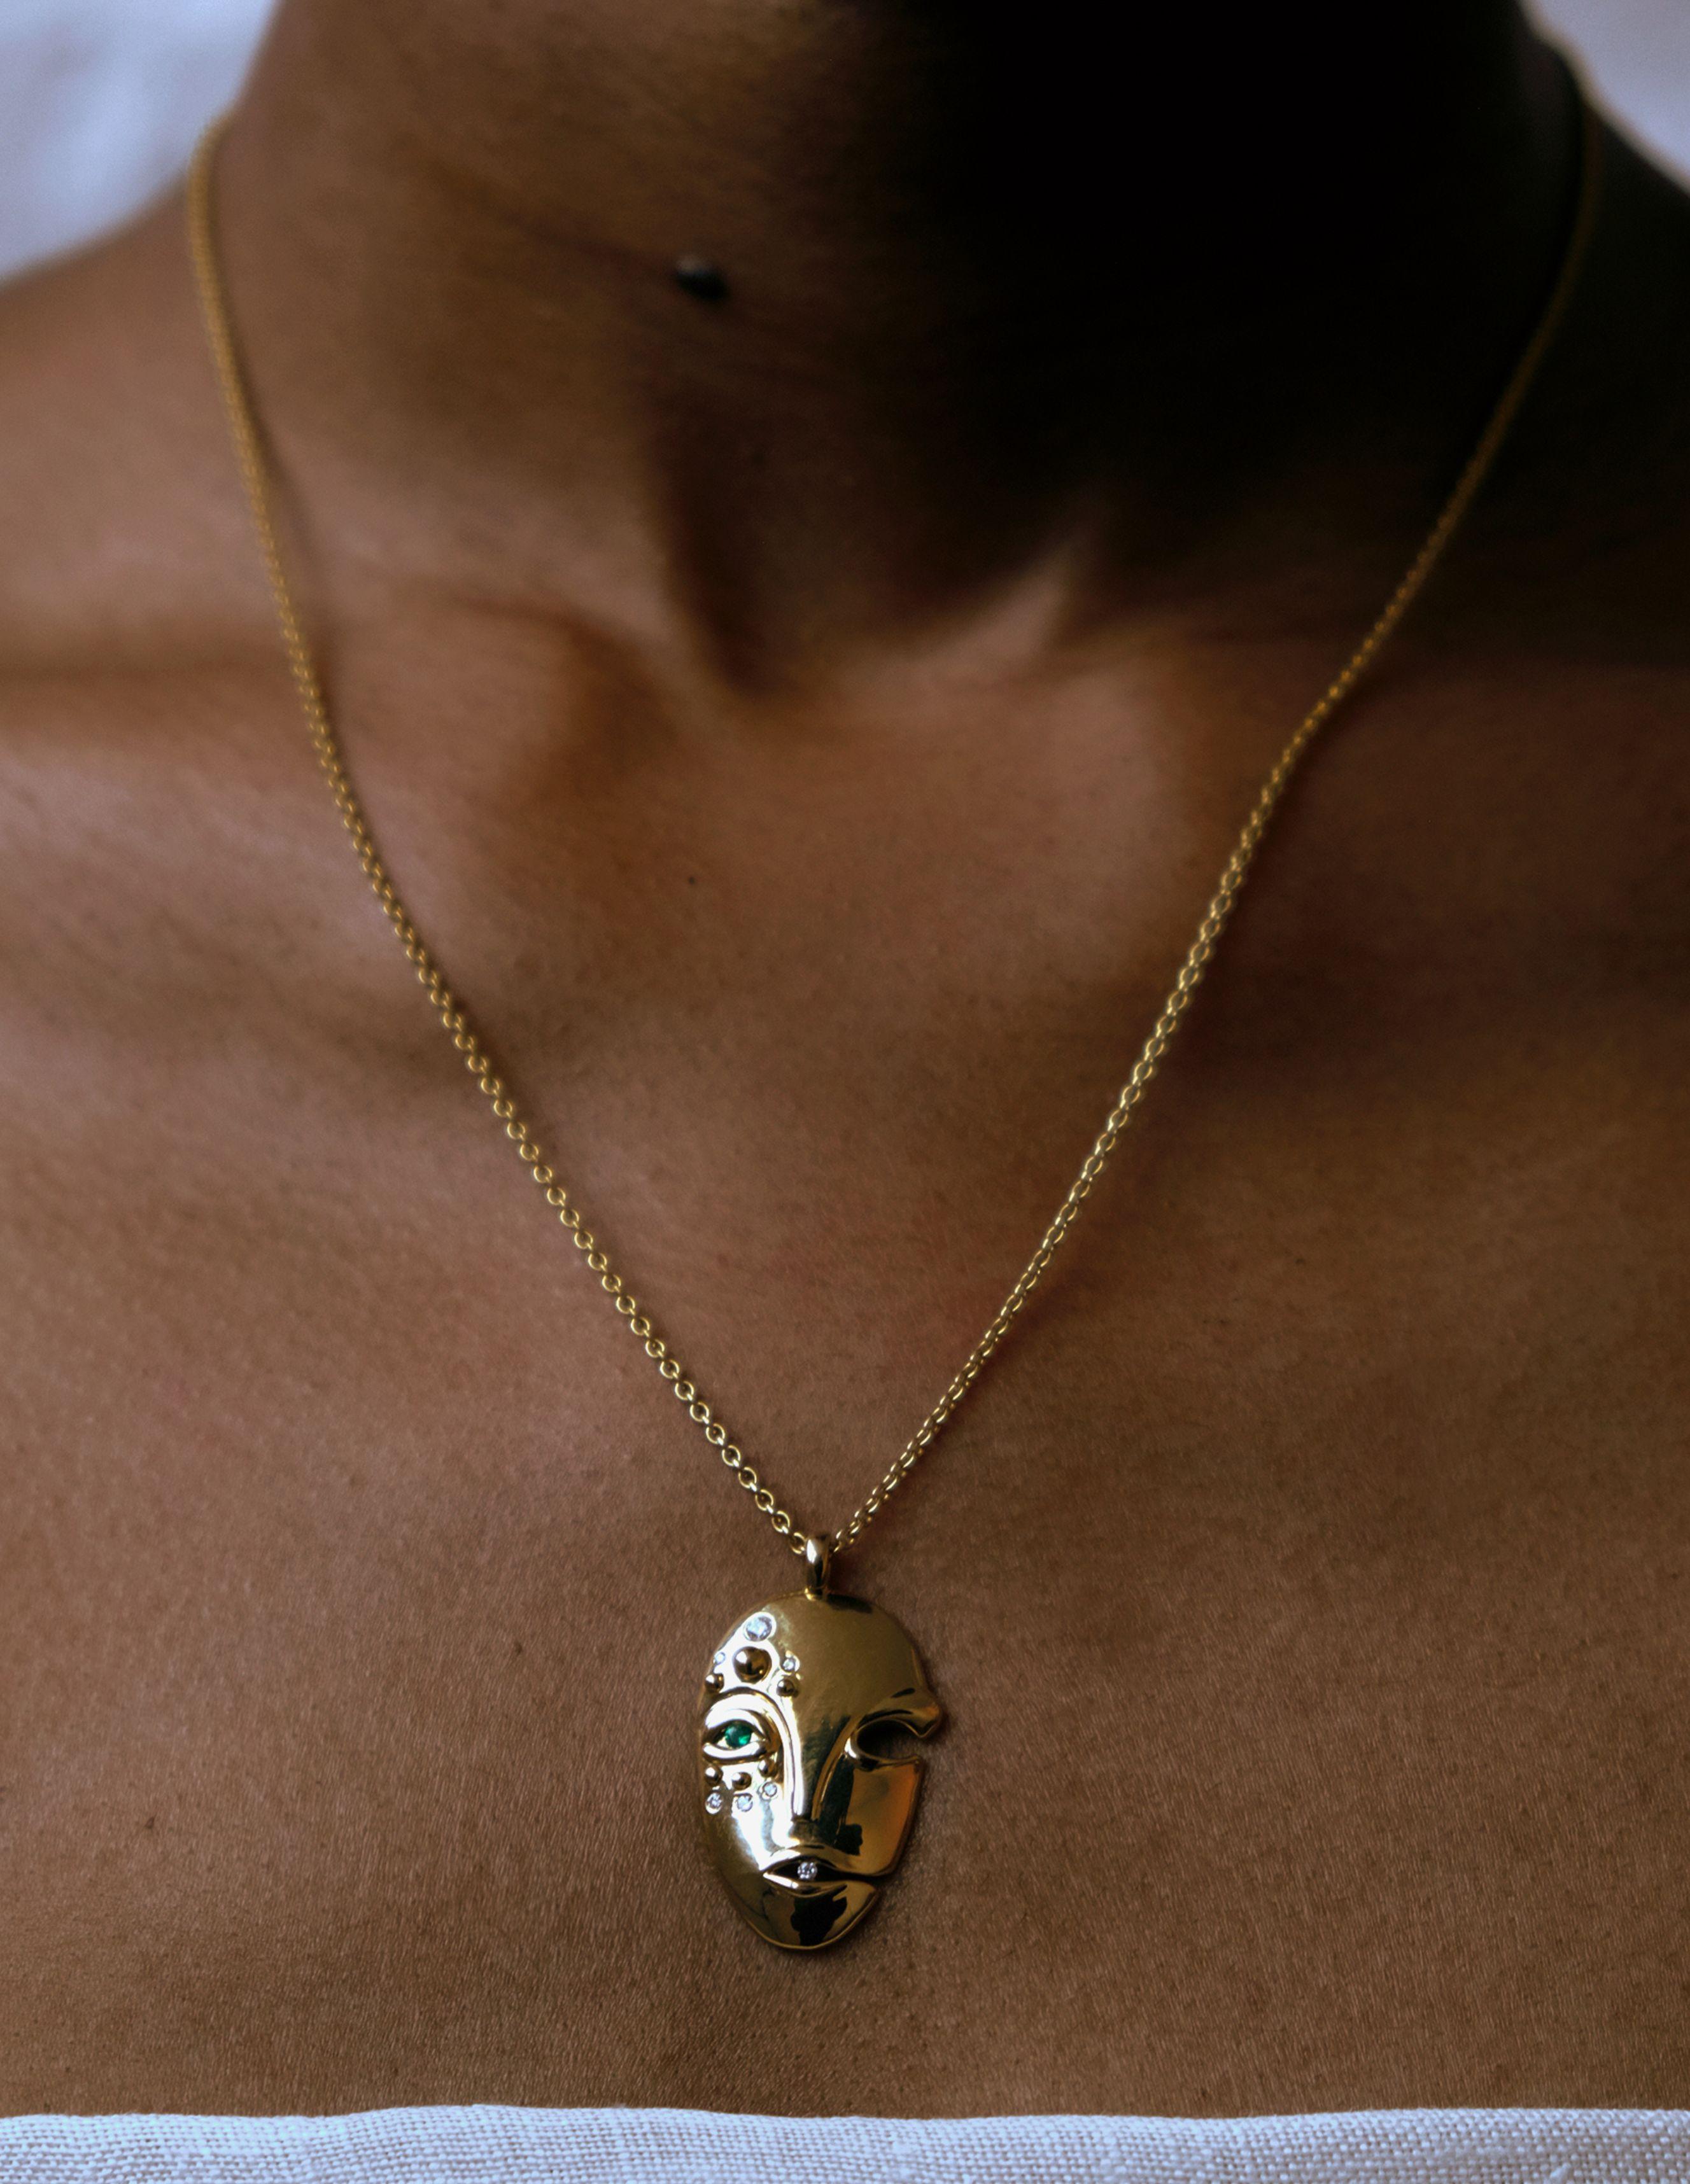 Sculptural Mask Pendant situating Brancusi’s modernity in conversation with West African sculptural tradition, featuring an eye set with a round cut emerald framed by graduated diamonds. 1.5 inch pendant on adjustable 18-20 Inch link chain with